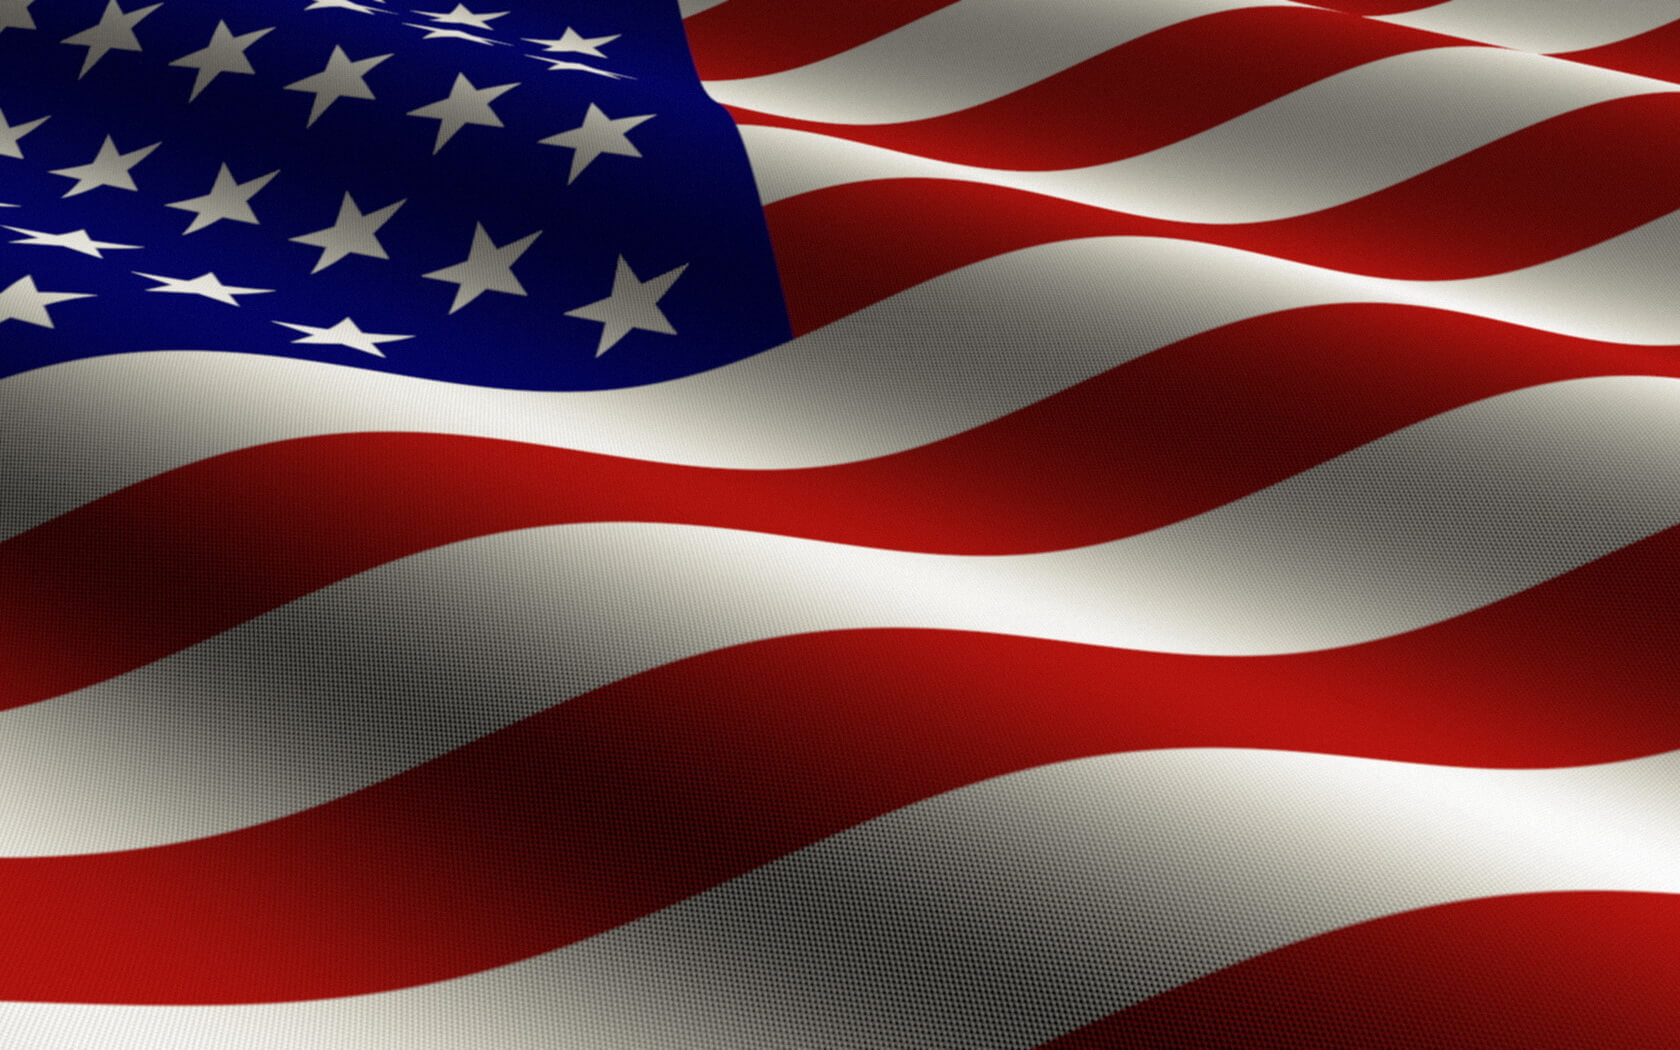 American Flag Backgrounds For Powerpoint Templates – Ppt Throughout American Flag Powerpoint Template